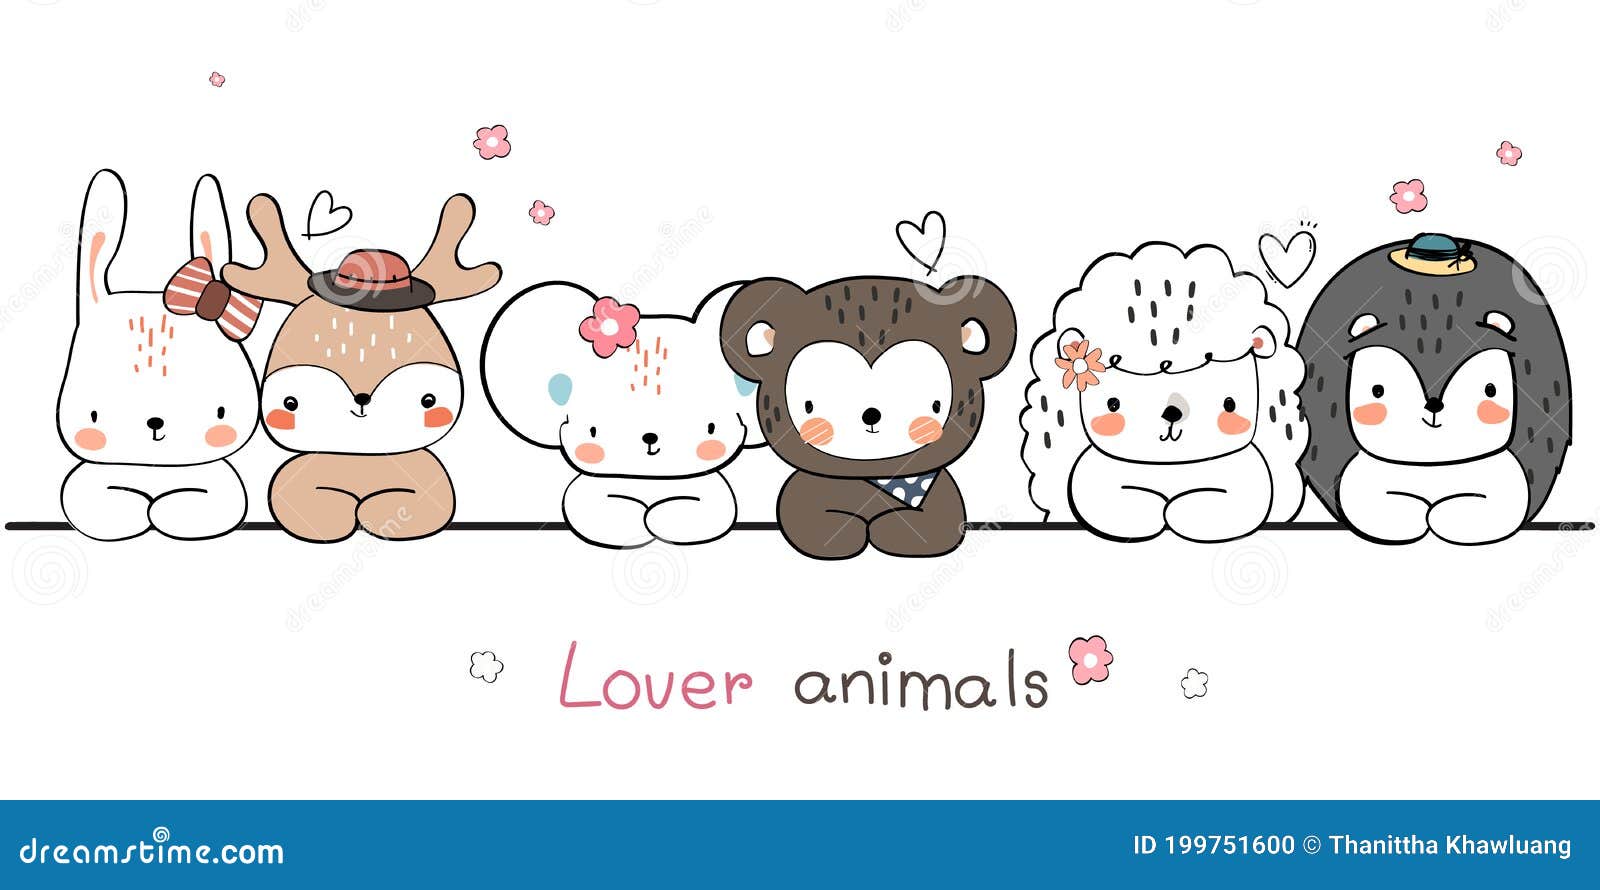 Cute Hand Drawing Wild Animal Family Greeting Cartoon Doodle Wallpaper  Stock Vector - Illustration of hand, childish: 199751600